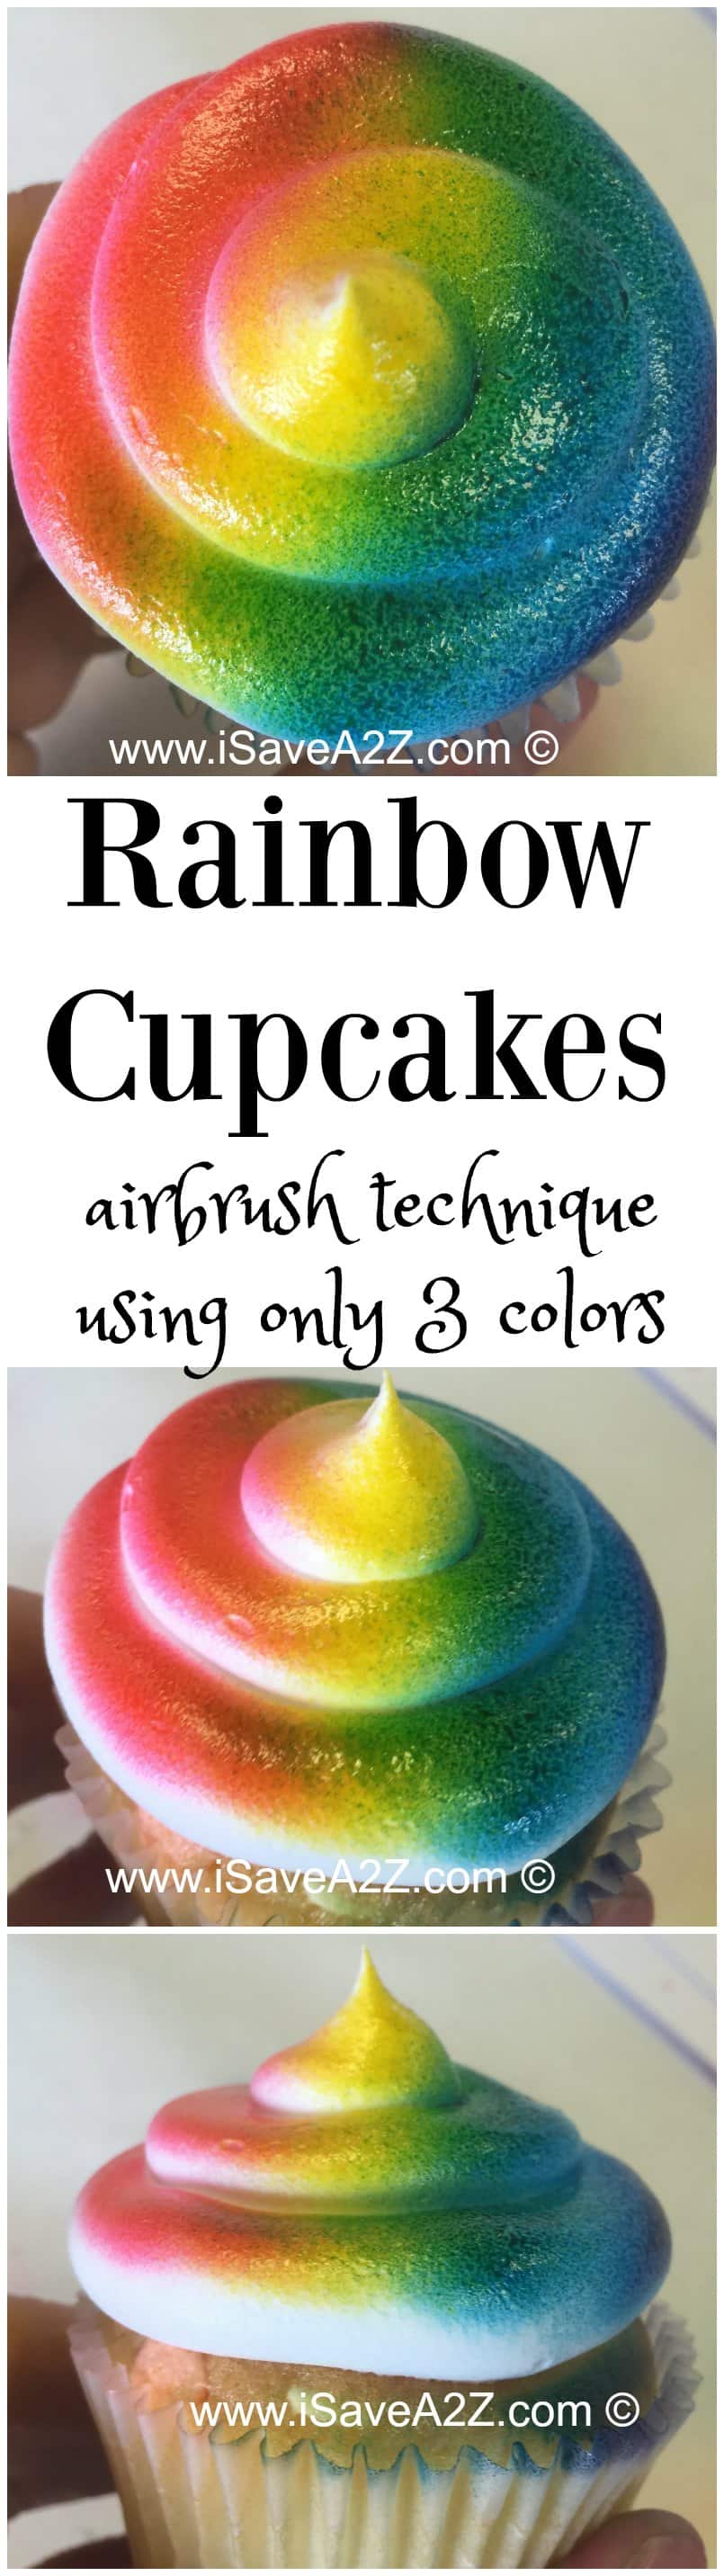 How to Airbrush Cupcakes into a rainbow design using only 3 colors!